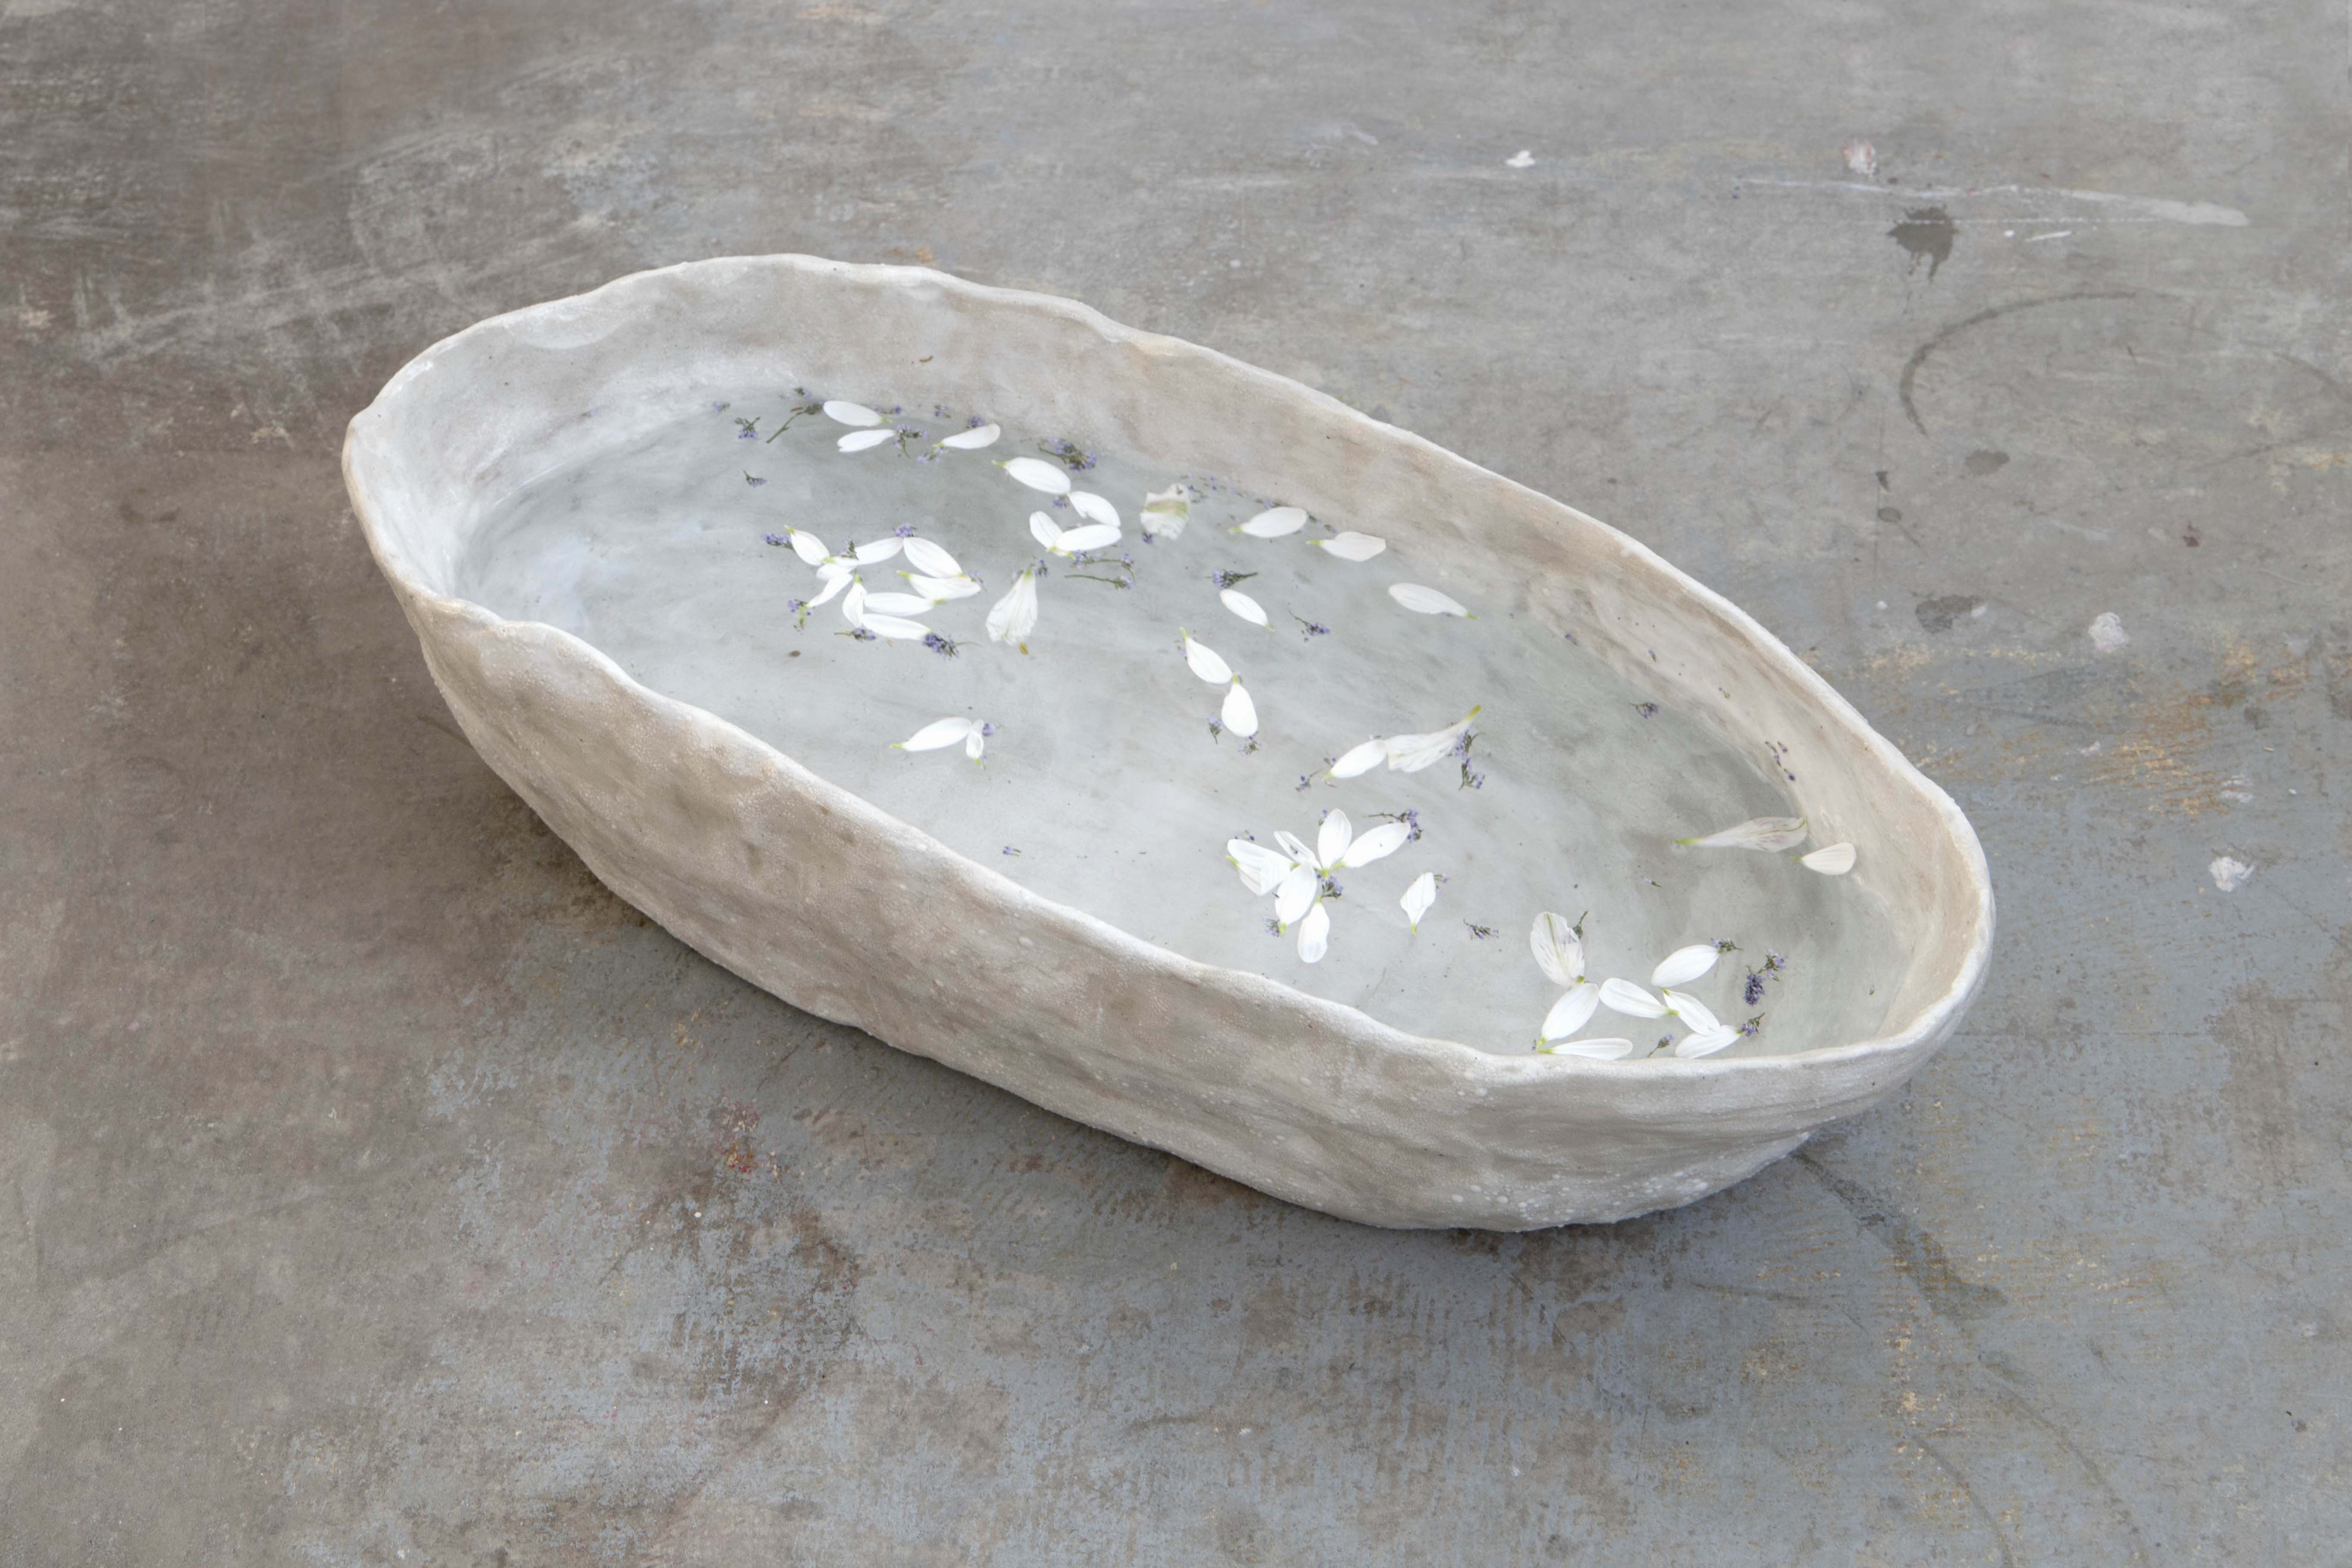 Ceramic bathtub displayed on the floor. The work has a textured grey glaze. The basin is filled with water and has white flowers, mint, and lavender floating inside.